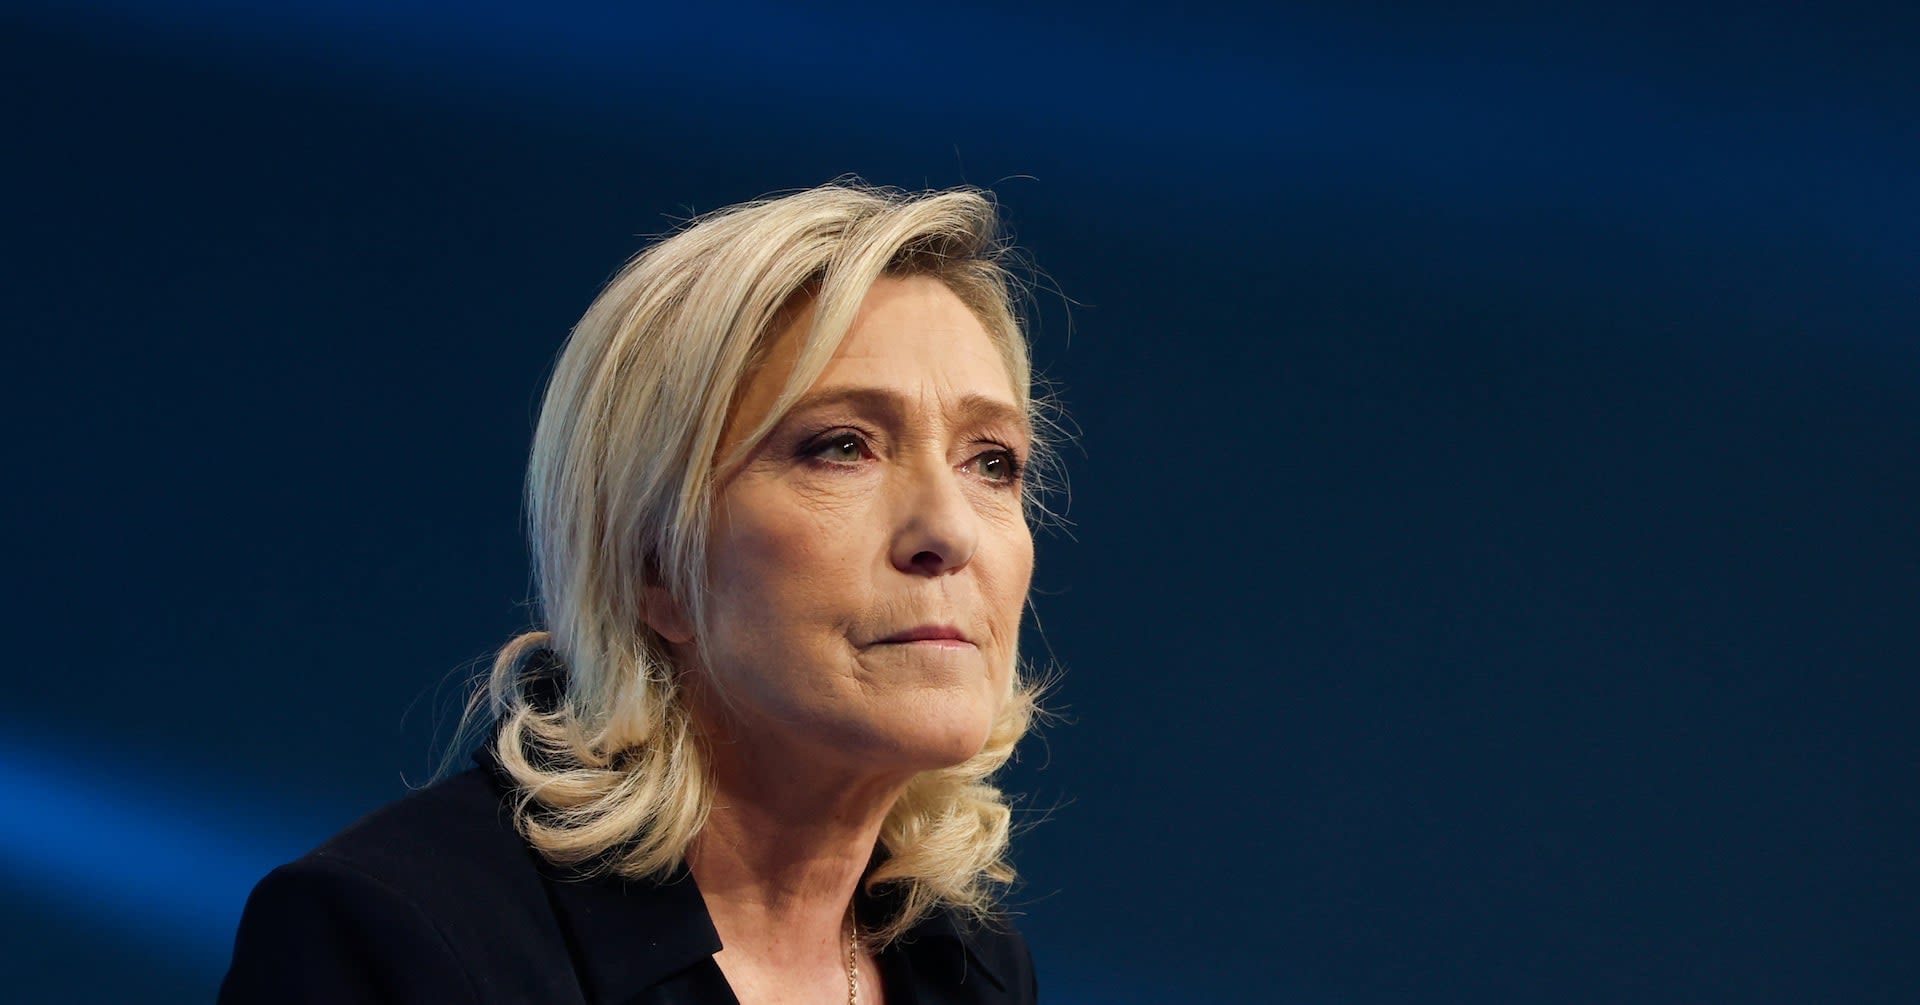 Le Pen wants 'clean break' with Germany's AfD after Nazi SS comments